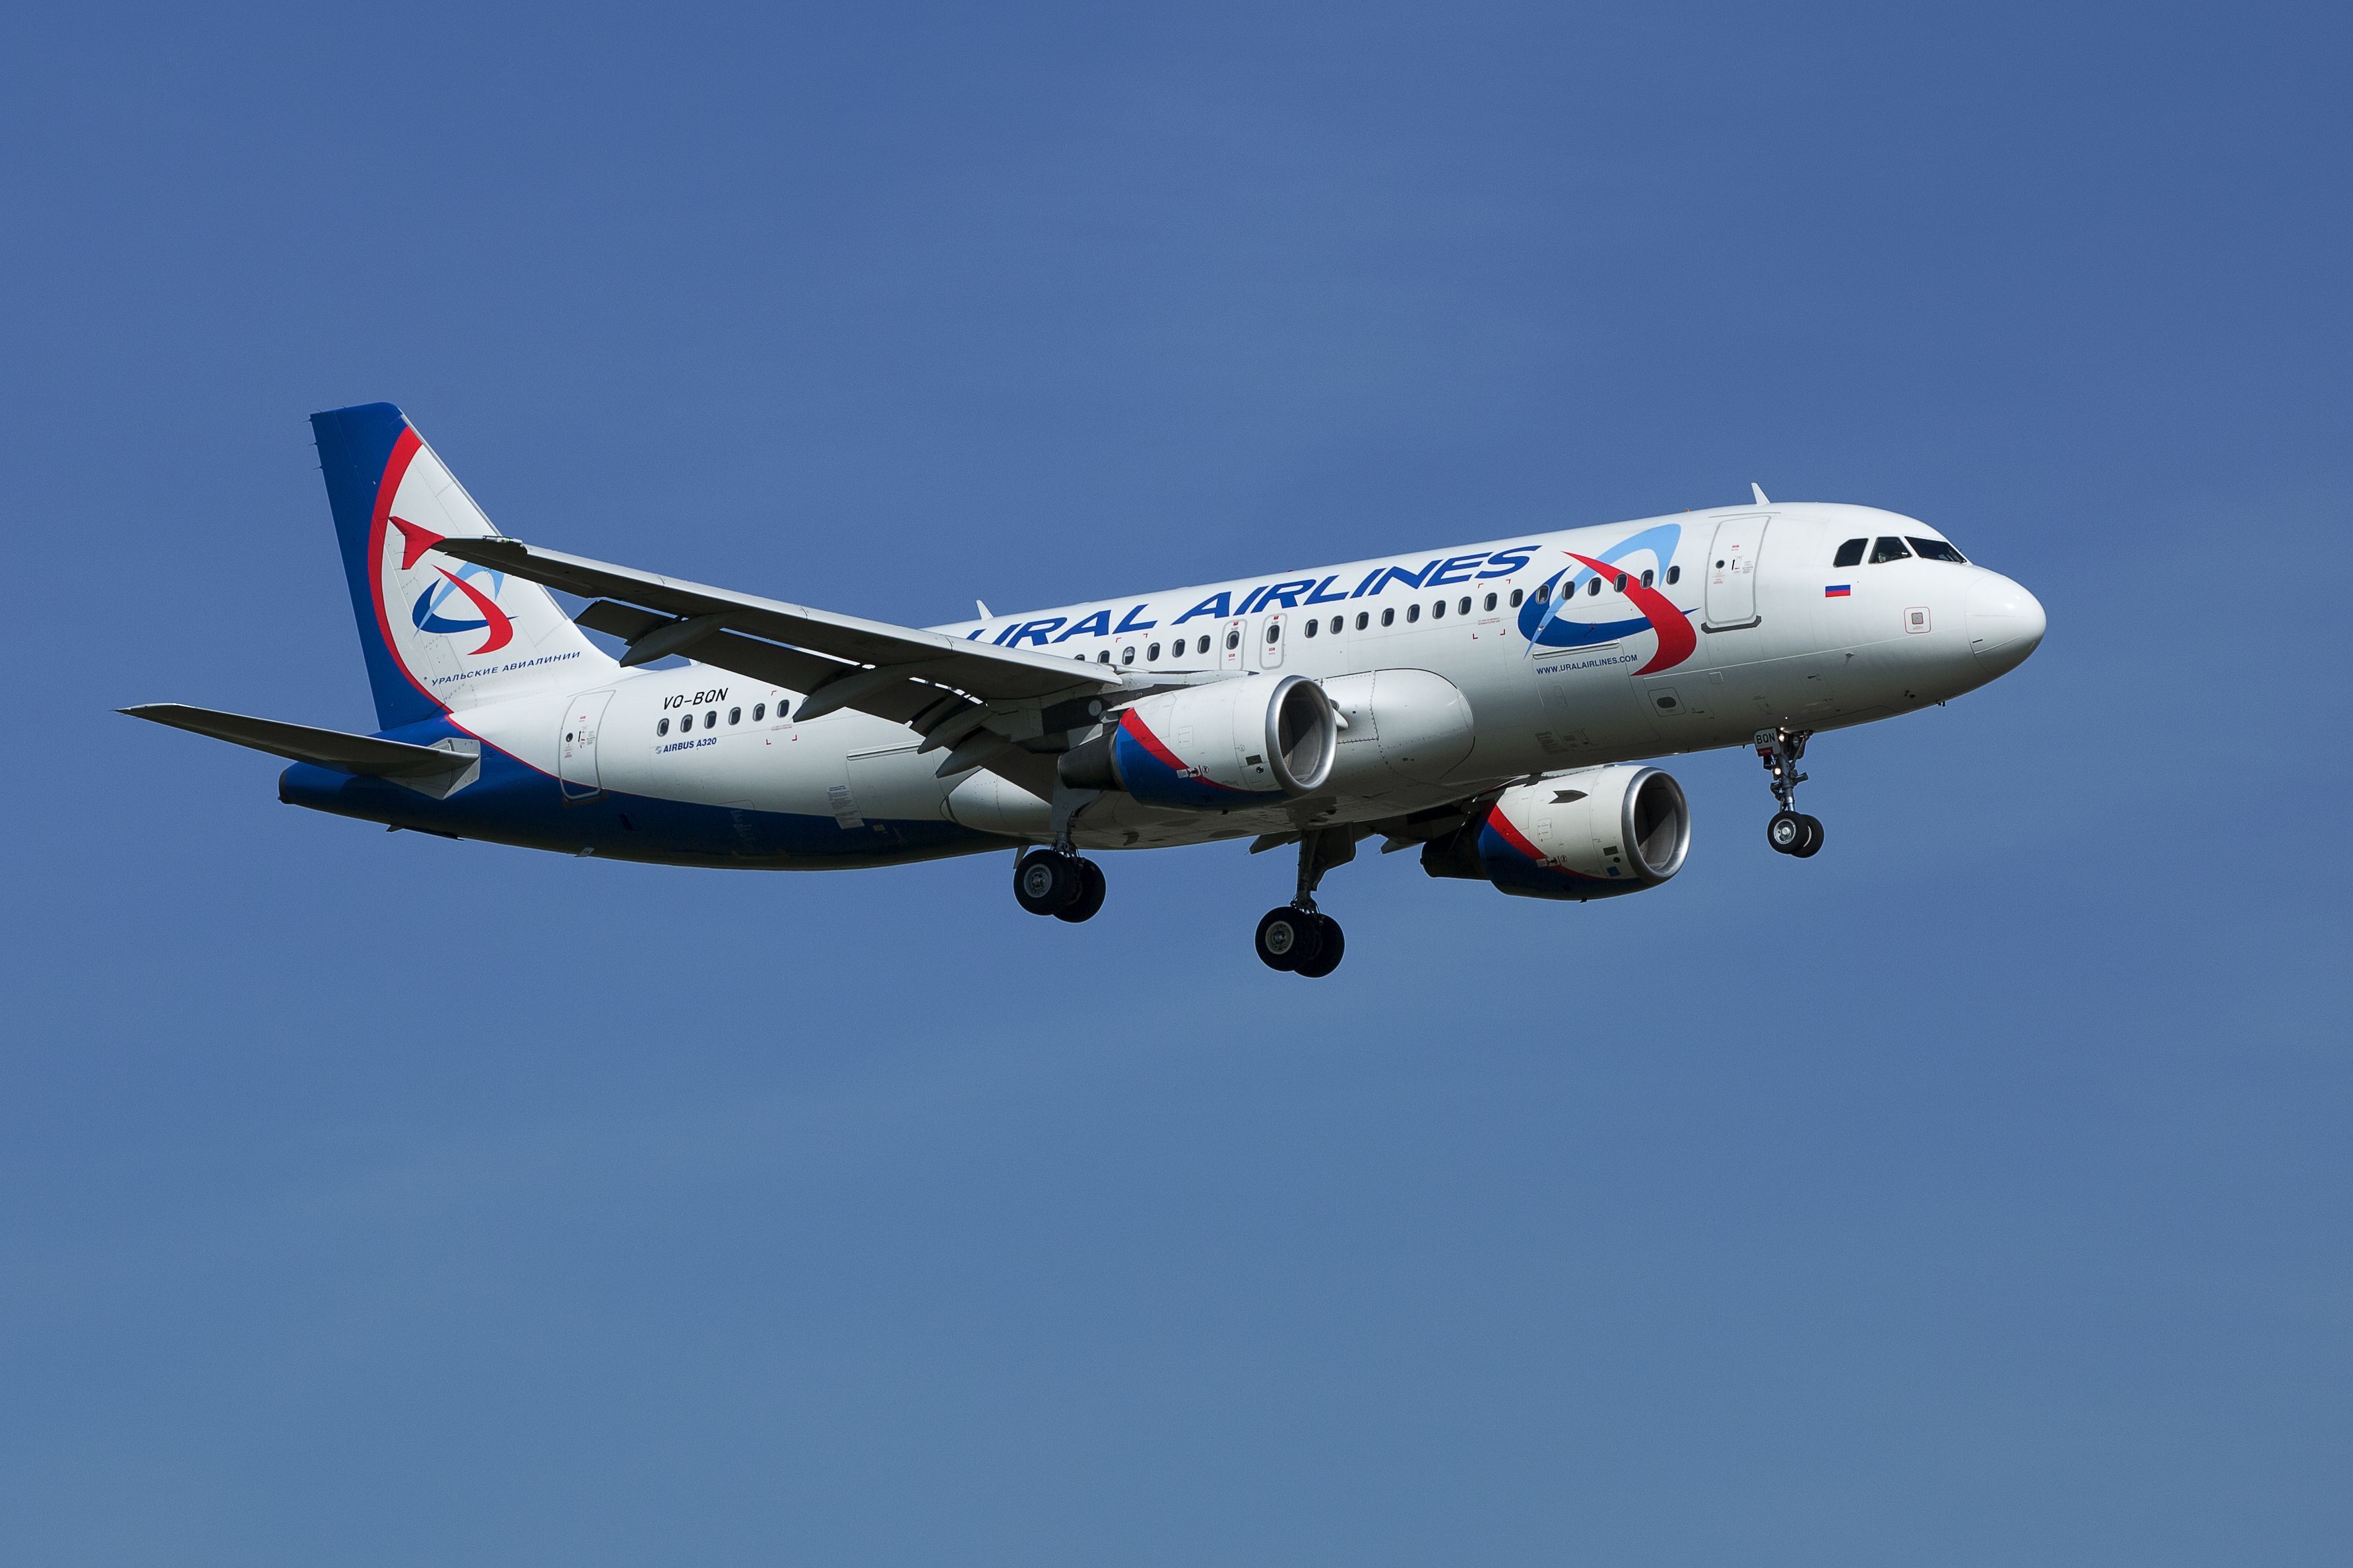 Ural Airlines Airbus A320 aircraft